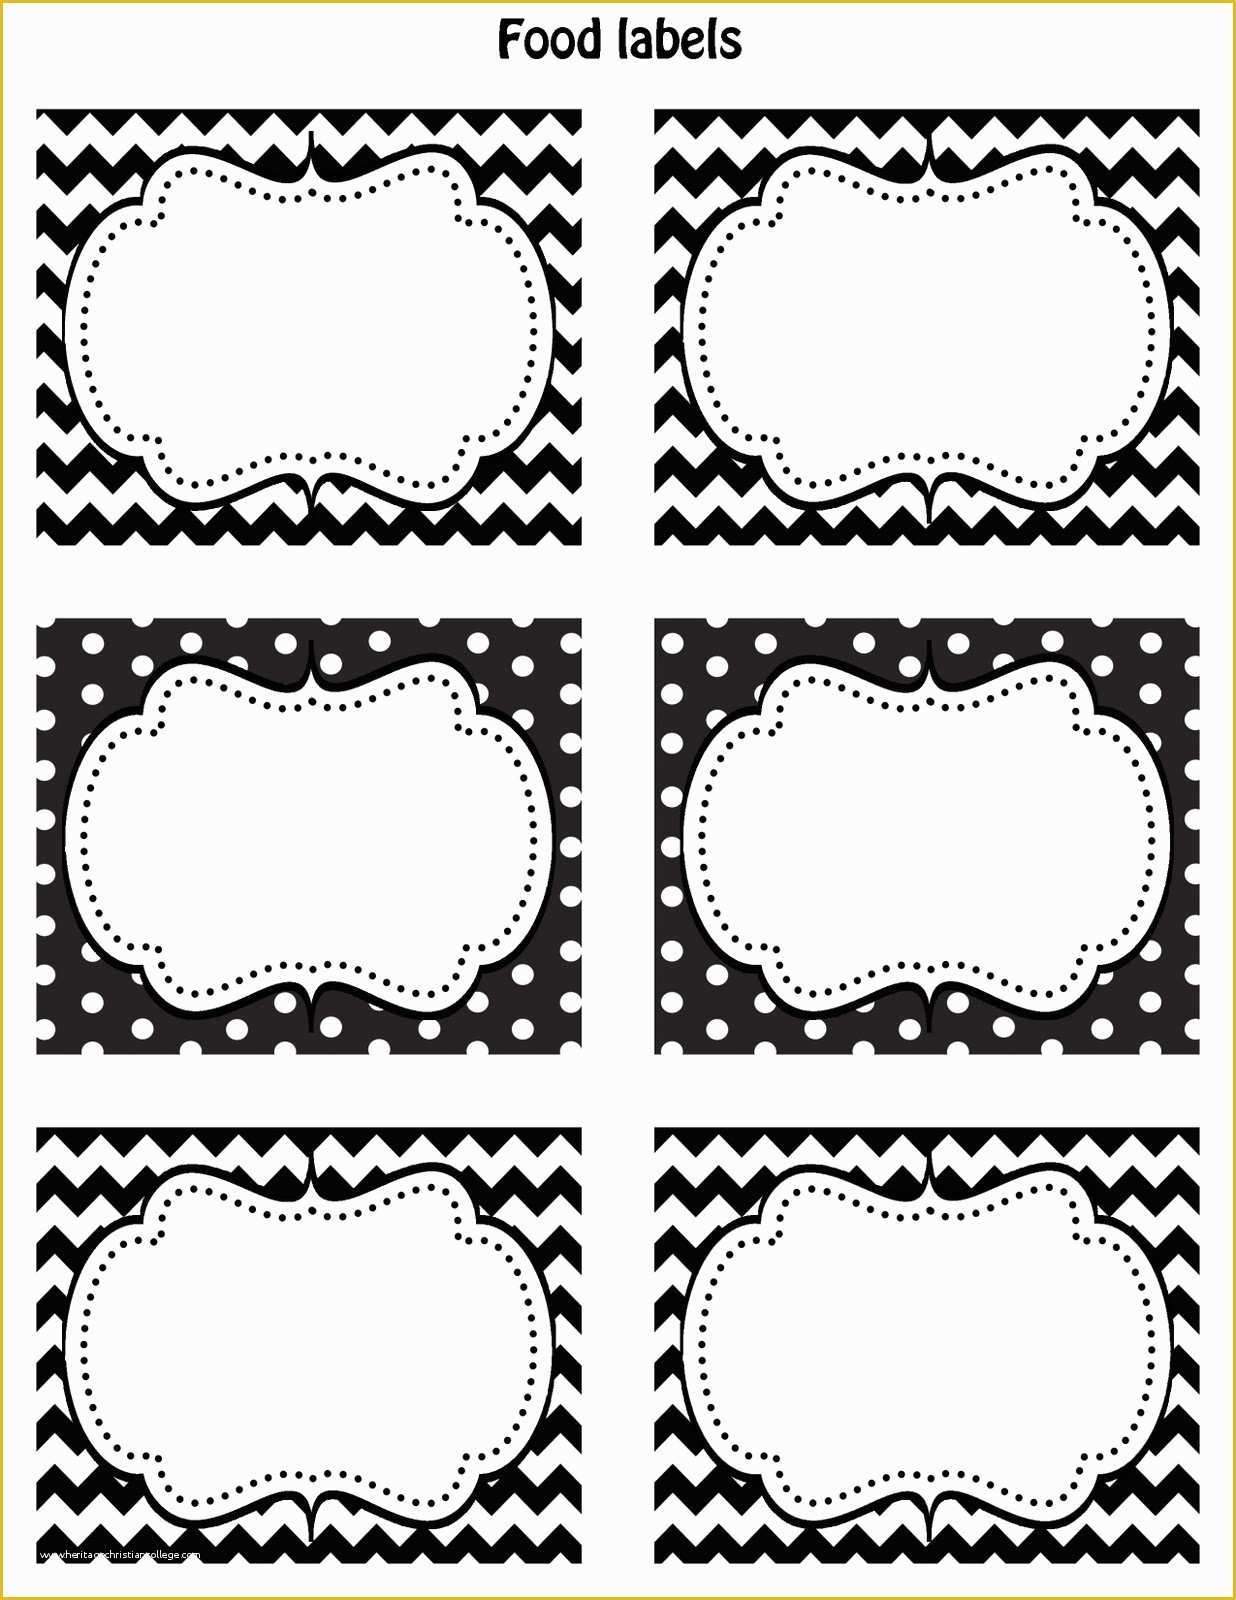 Free Printable Food Labels Templates Of Happy Friday Free Printable Food Labels